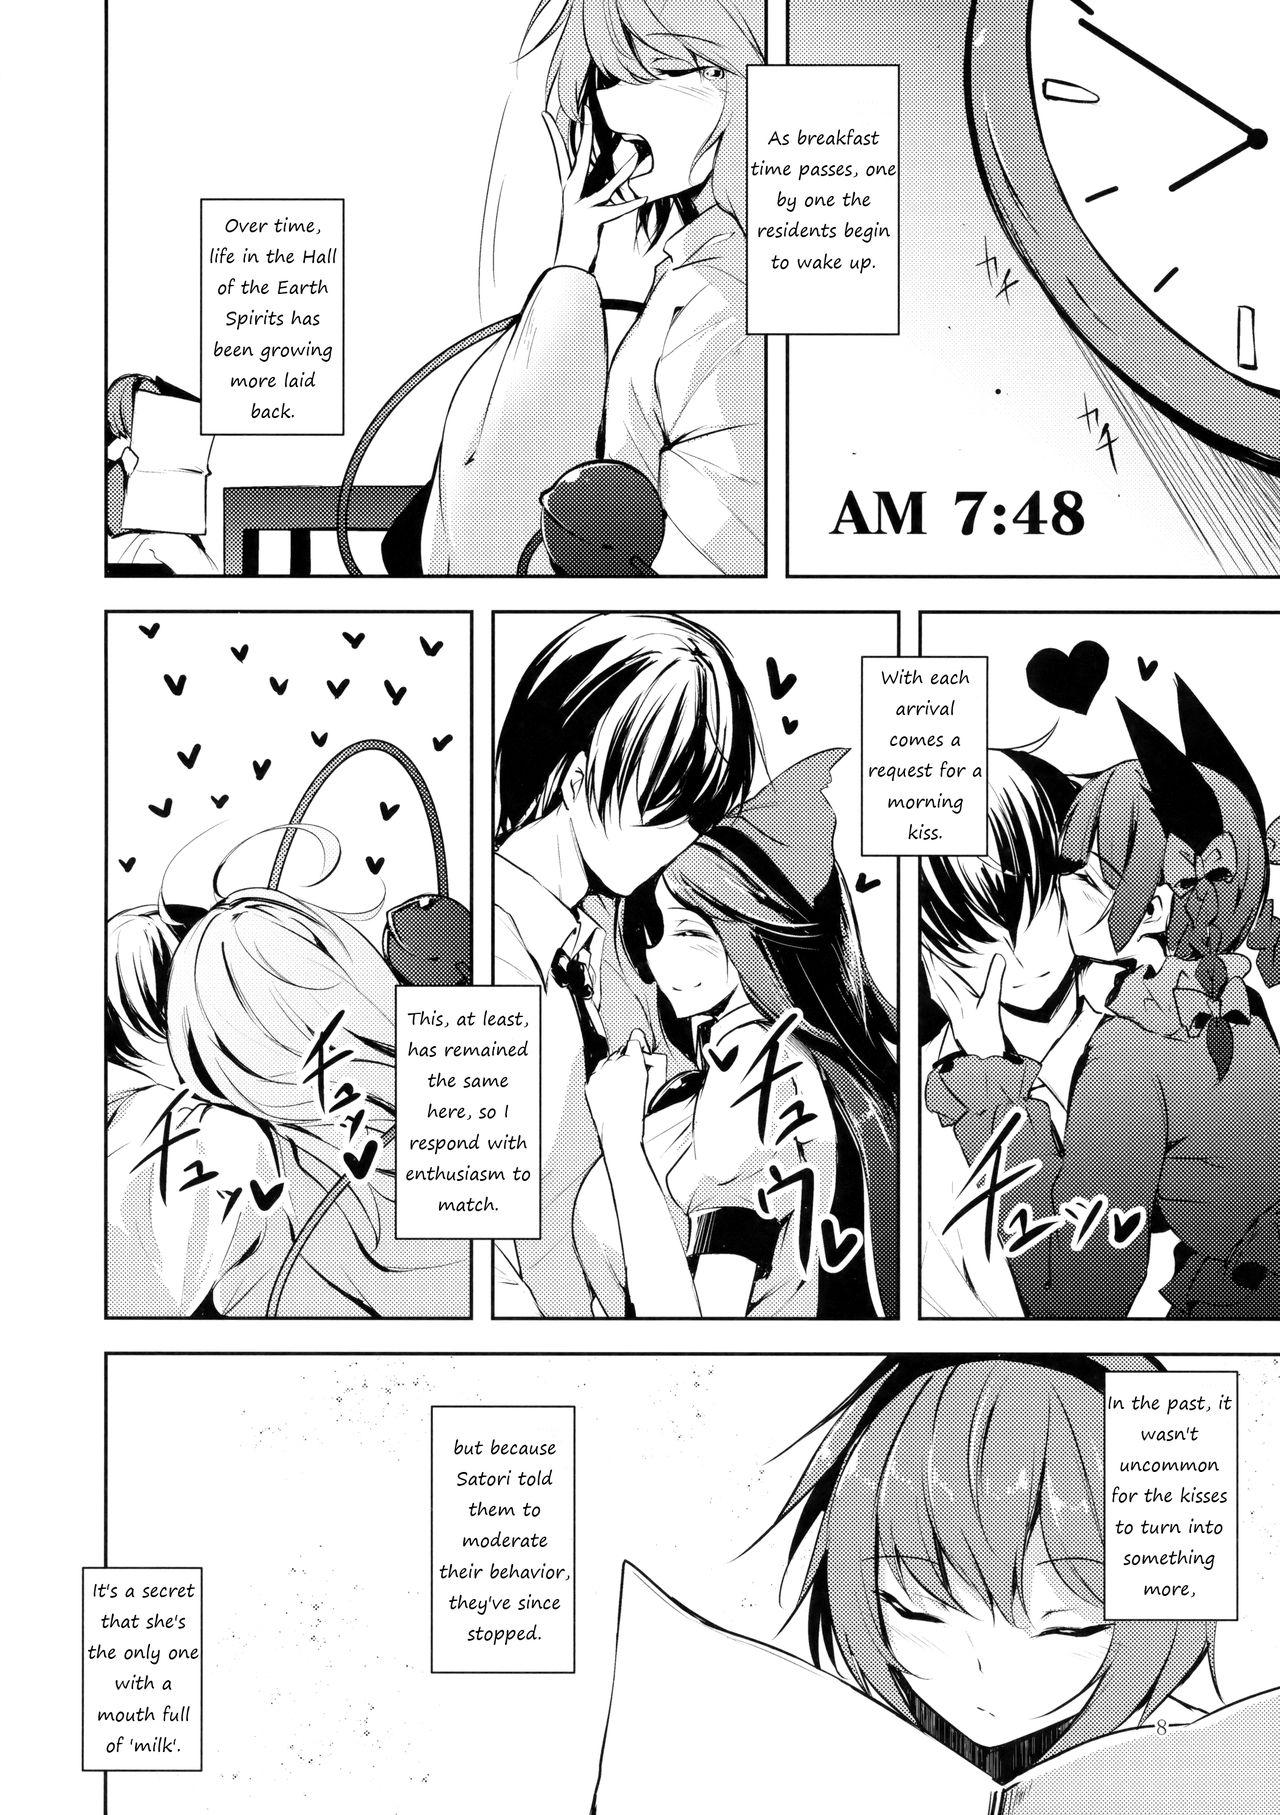 Whipping Komeiji Schedule AM - Touhou project Tiny Tits - Page 9